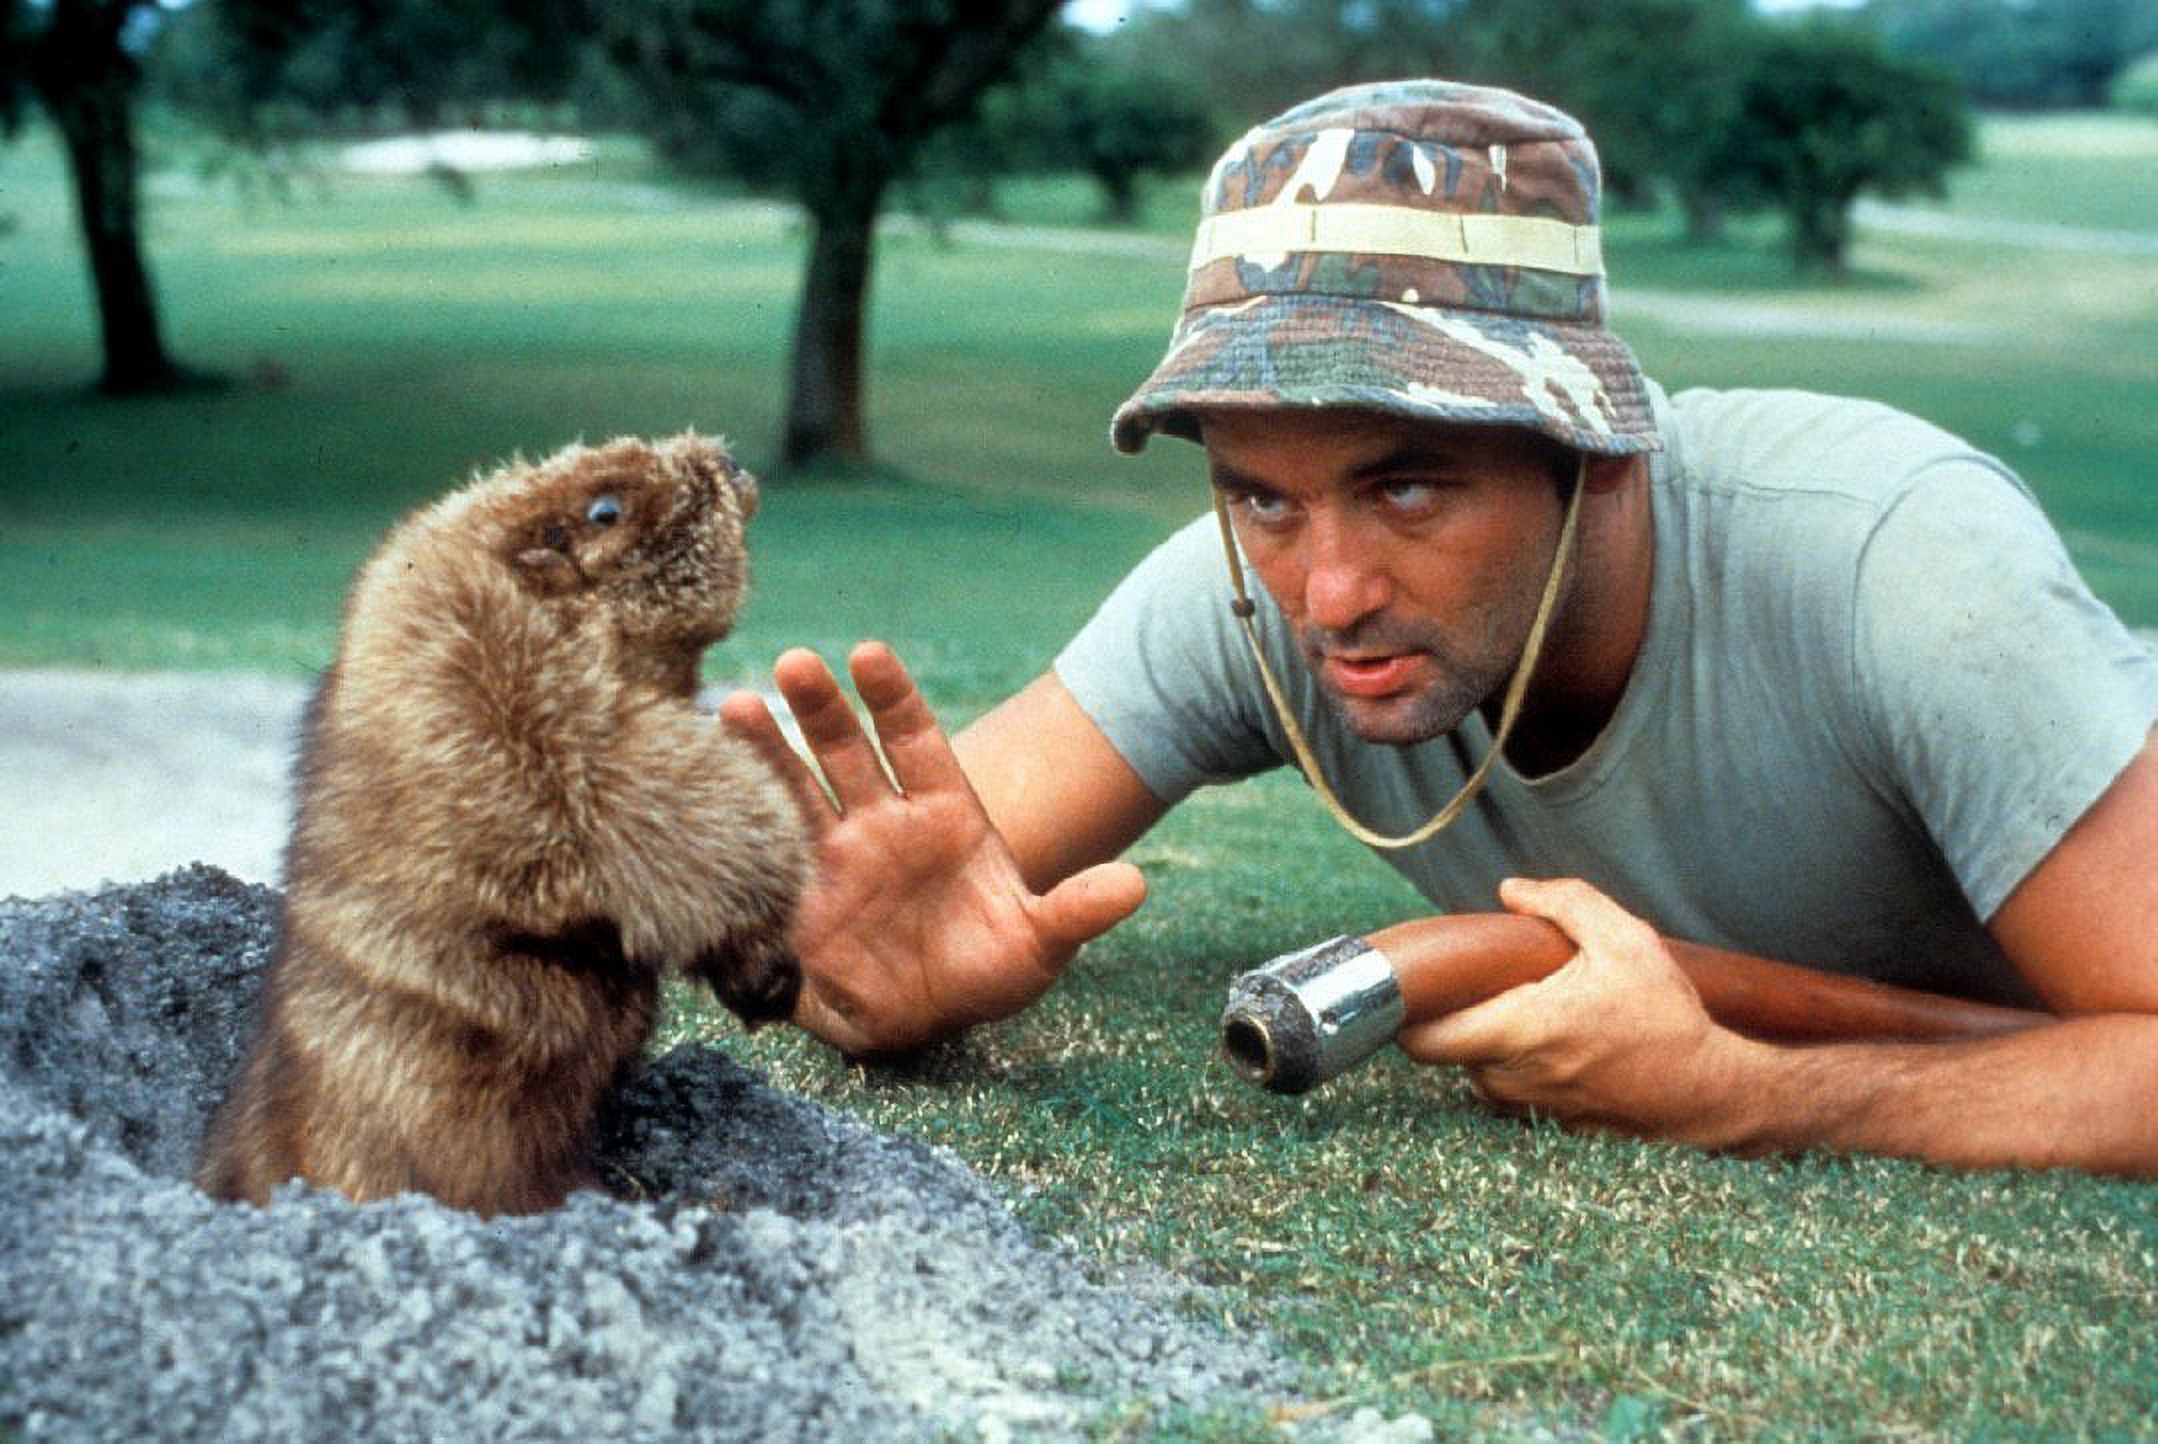 Caddyshack (30th Anniversary) (DVD), Warner Home Video, Comedy - image 5 of 7